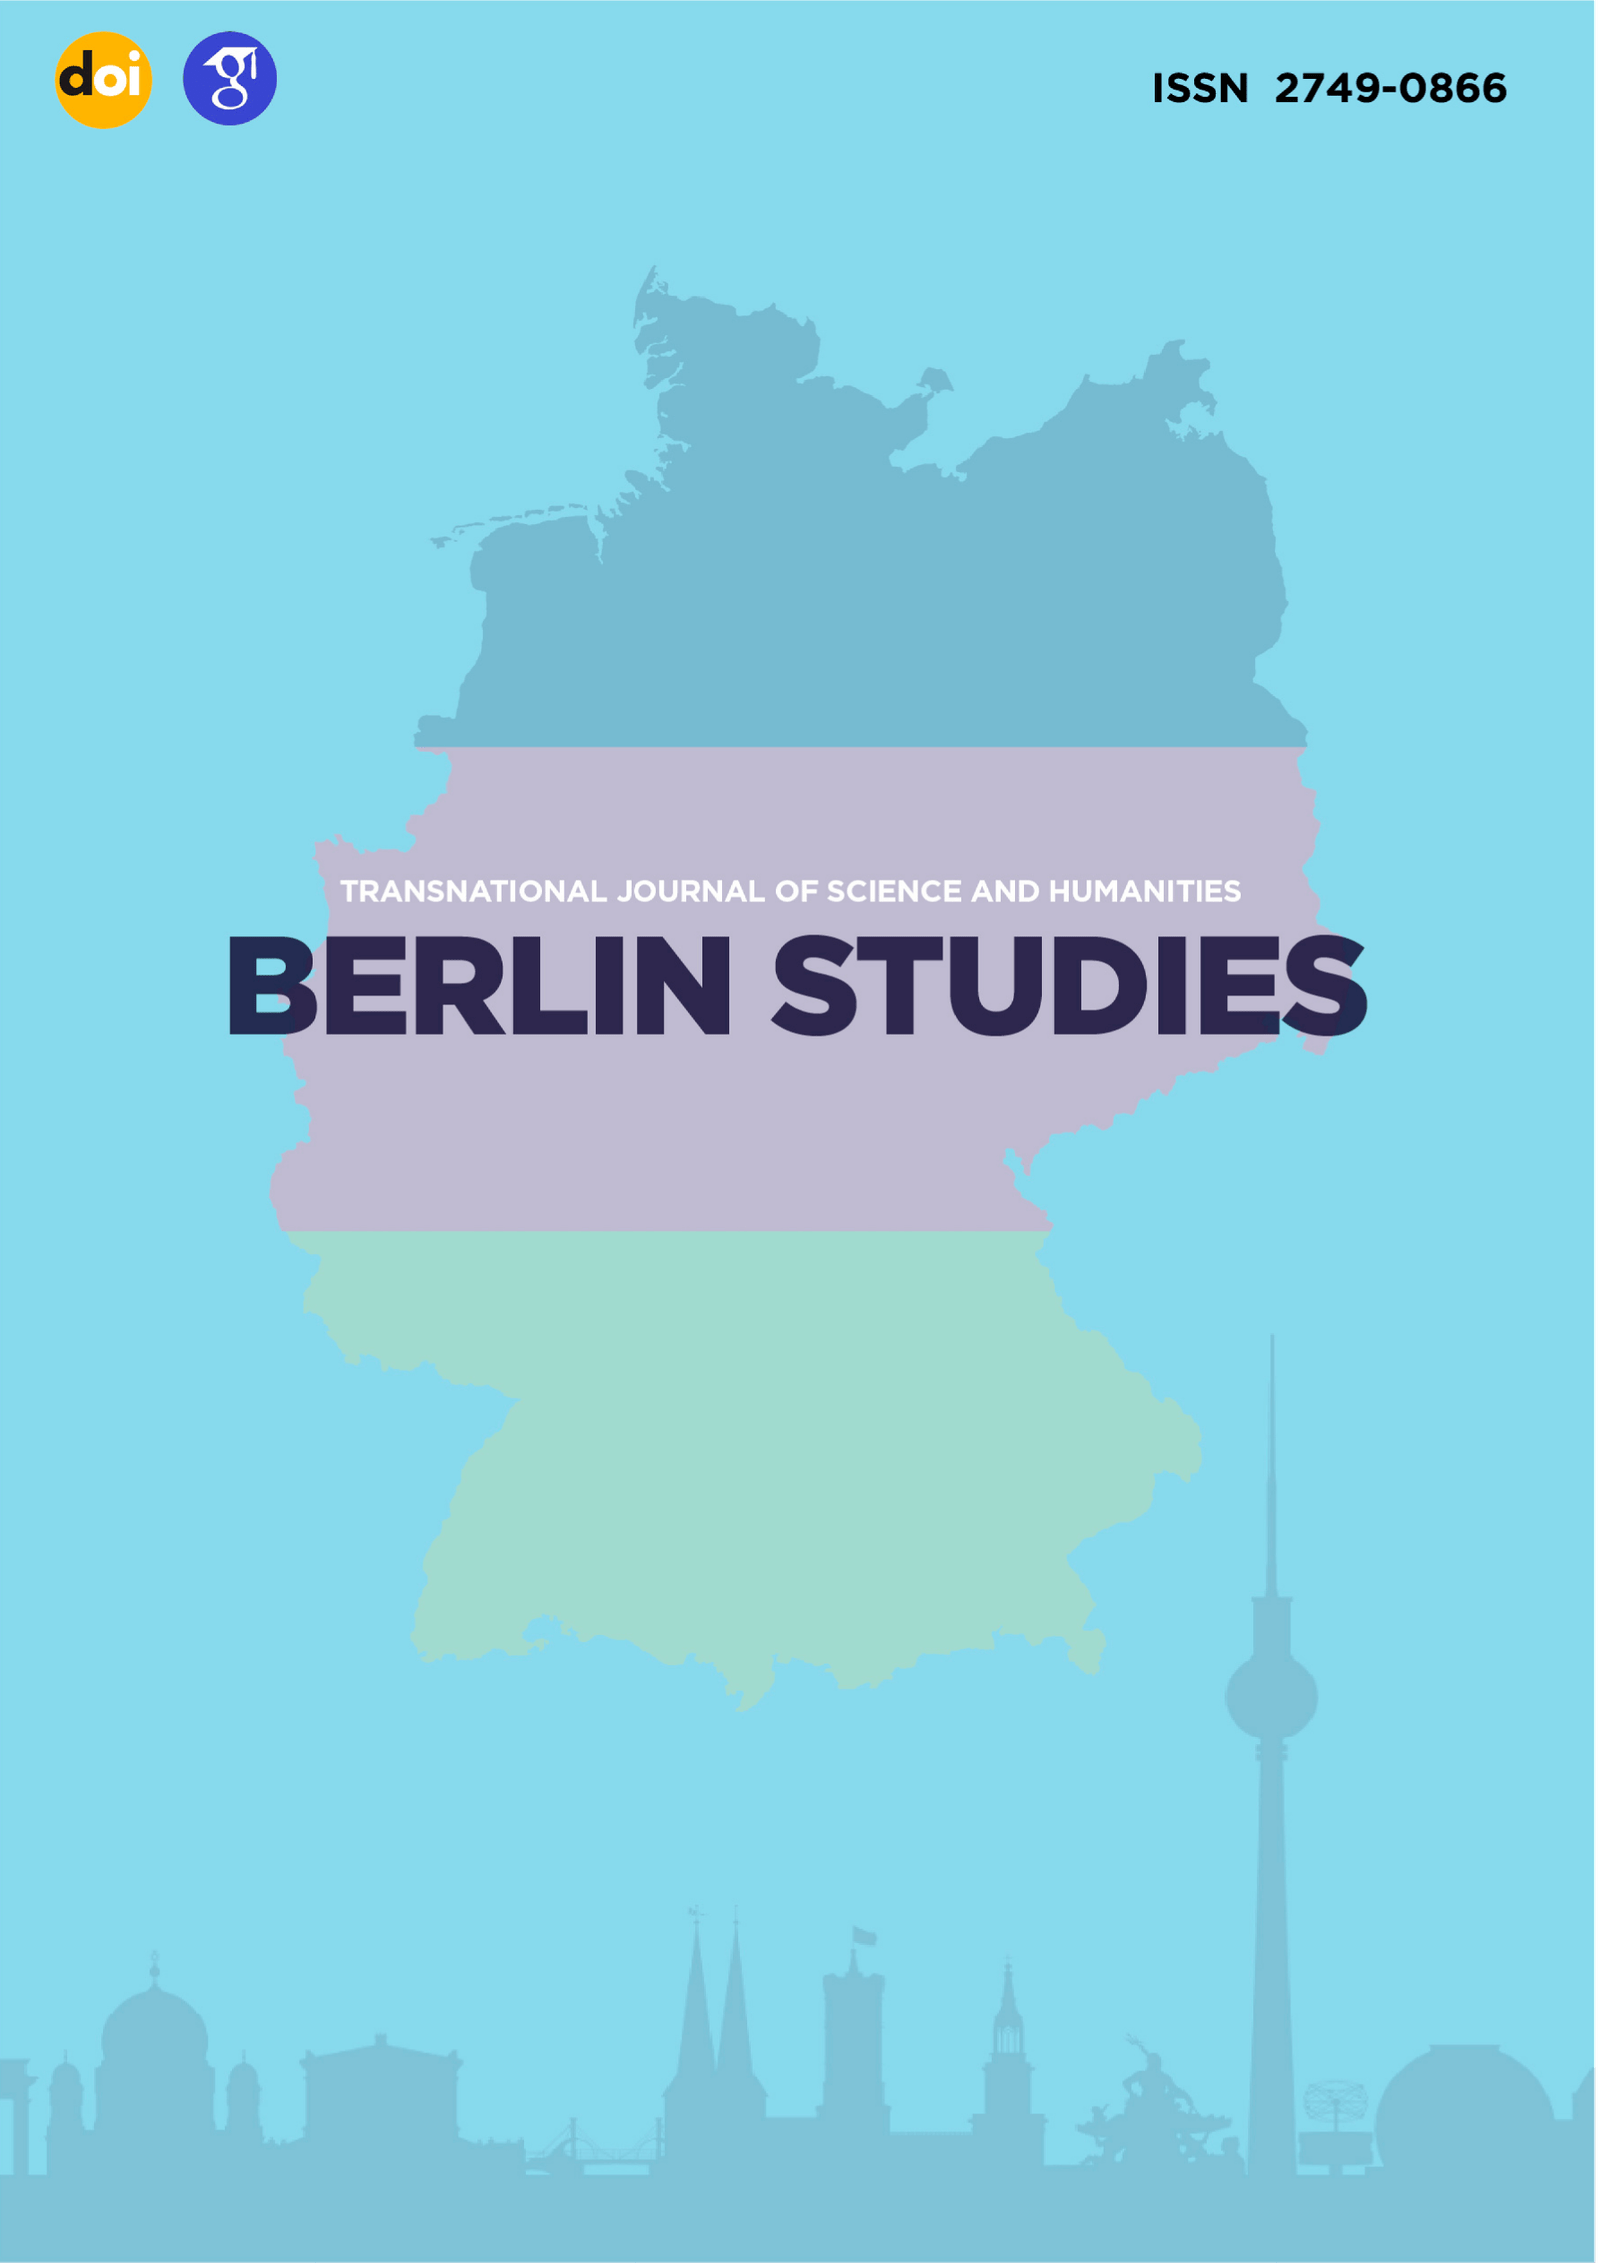 					View Vol. 2 No. 1.5 Pedagogical sciences (2022): Berlin Studies Transnational Journal of Science and Humanities
				